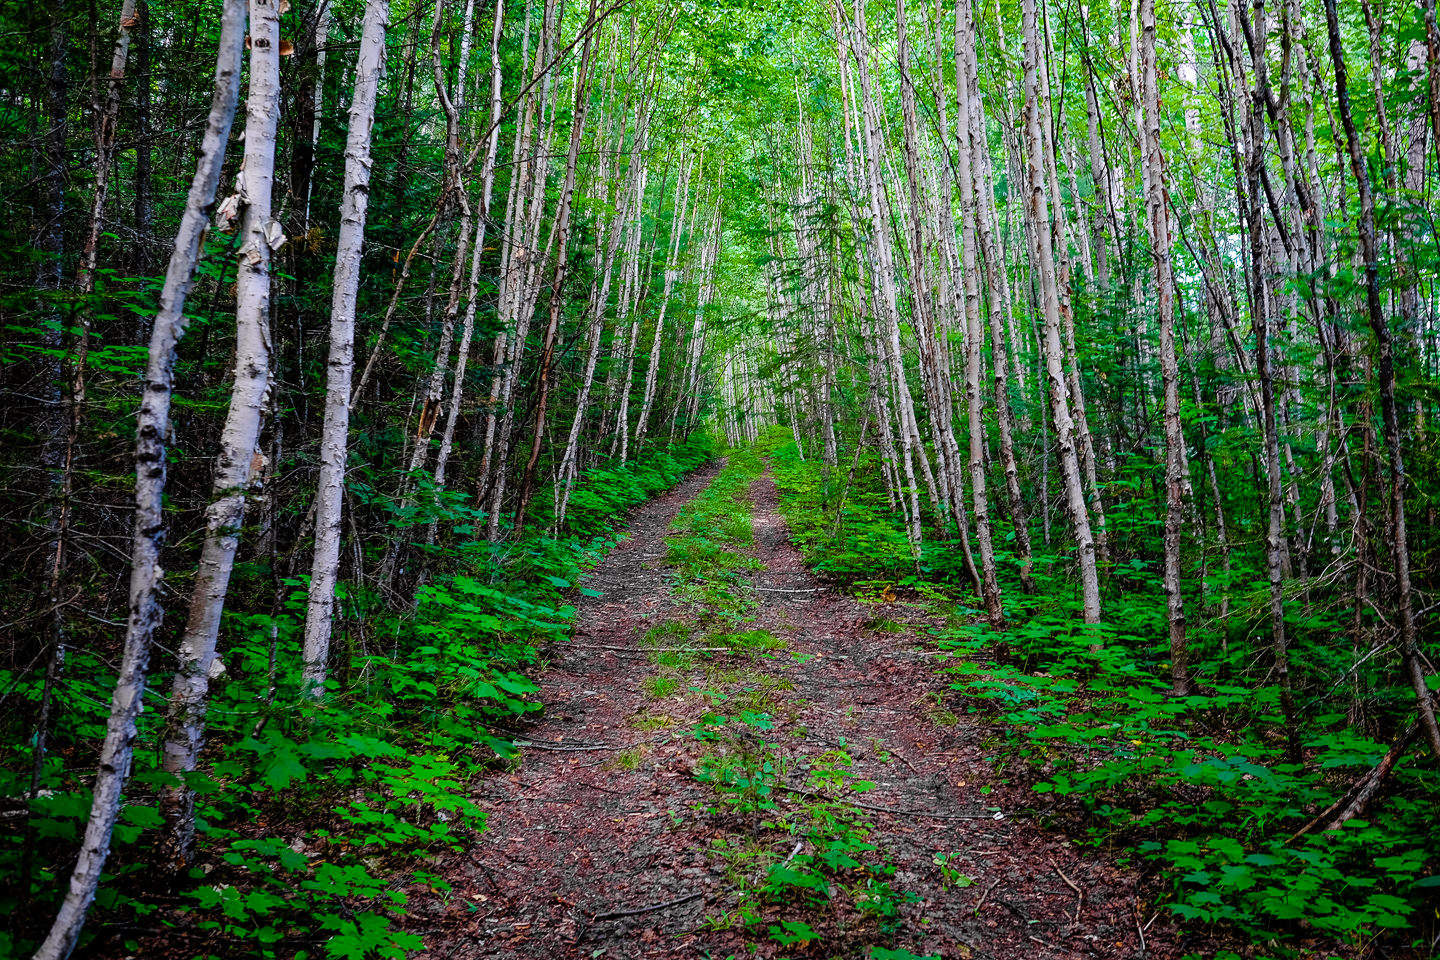 A path in the forest lined with birch trees.